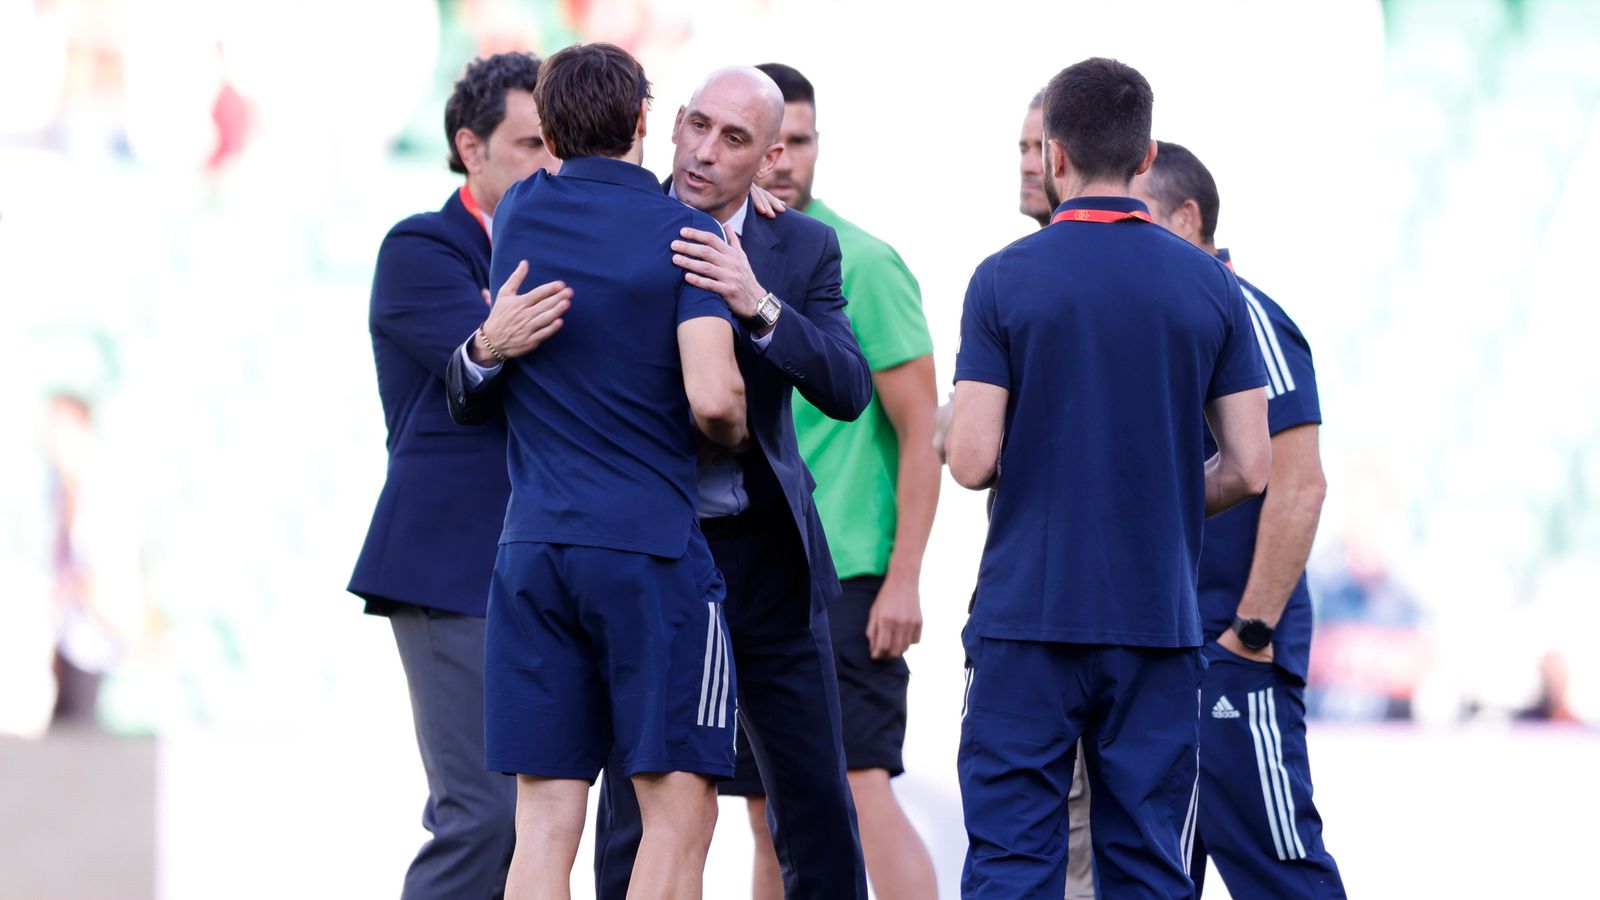 Spanish men’s team express solidarity with women after Luis Rubiales kiss